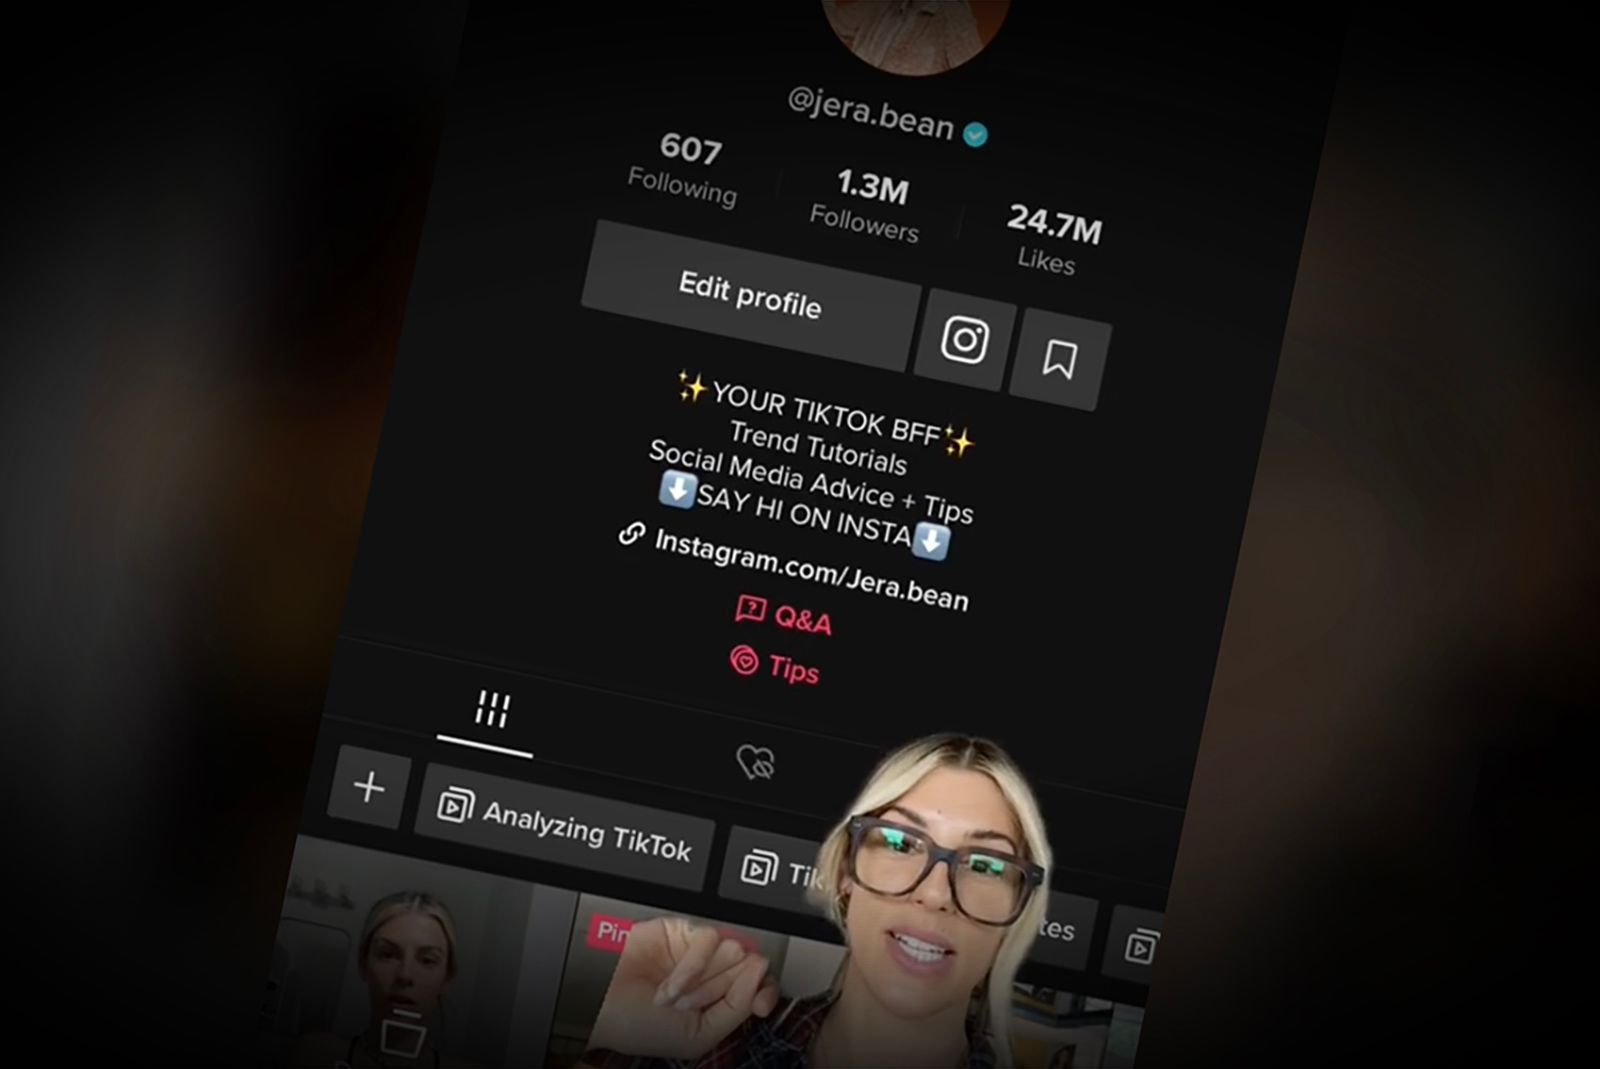 TikTok starts testing a tipping feature: How to get it and how it works lead photo 1